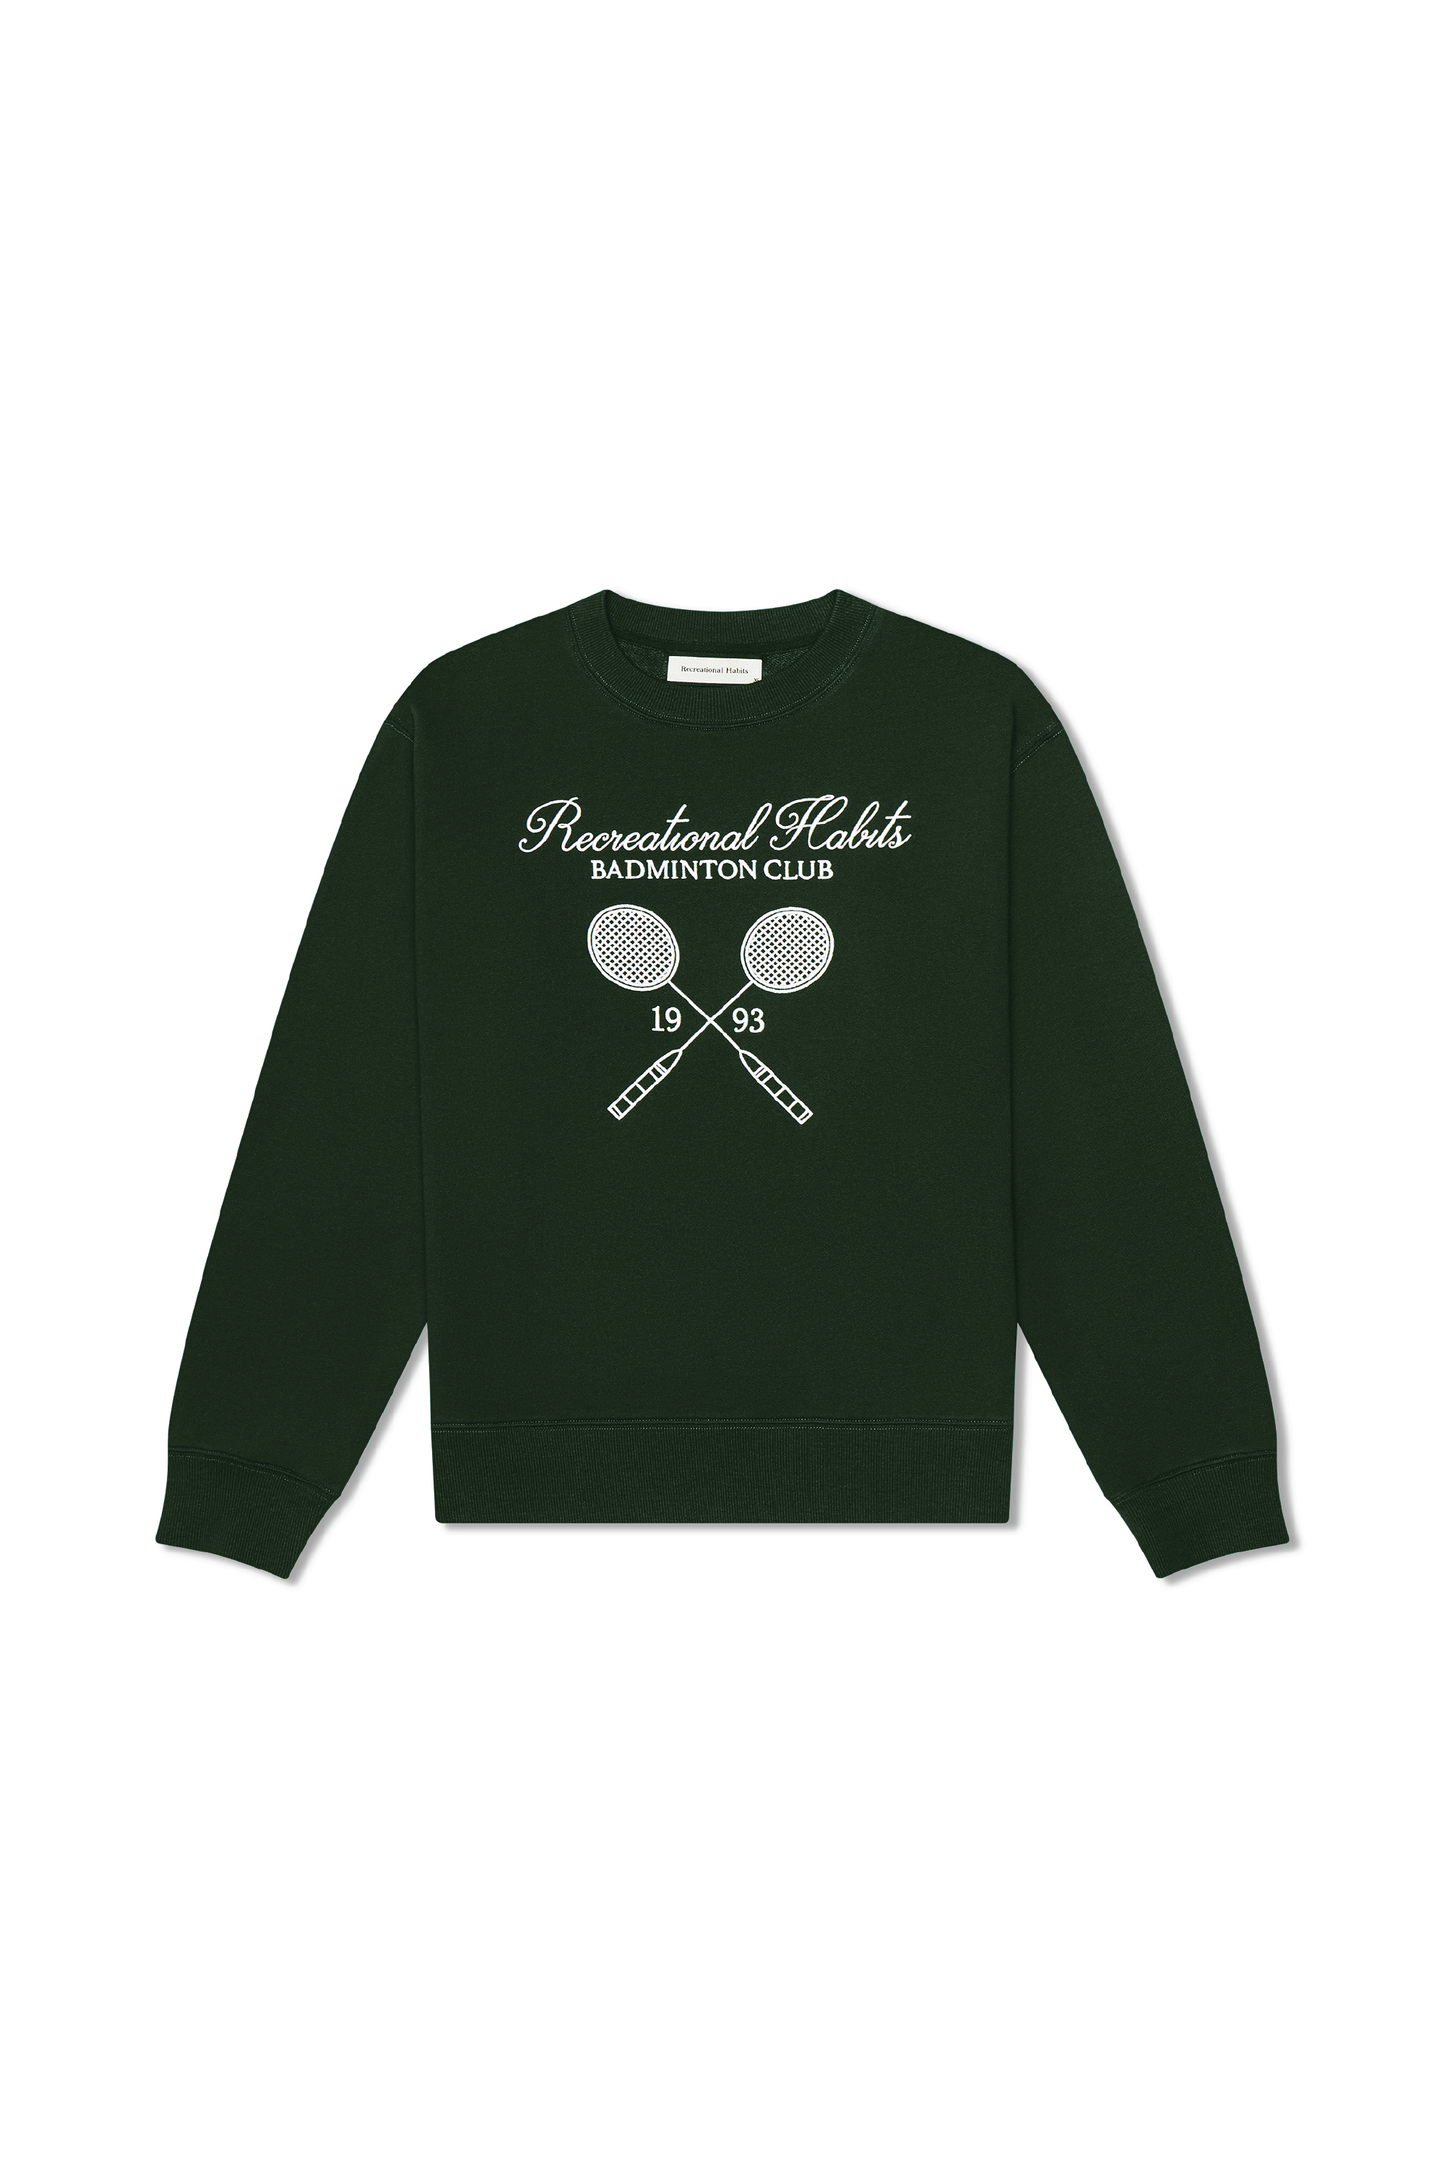 Cornell Crewneck in Green with Badminton Graphic